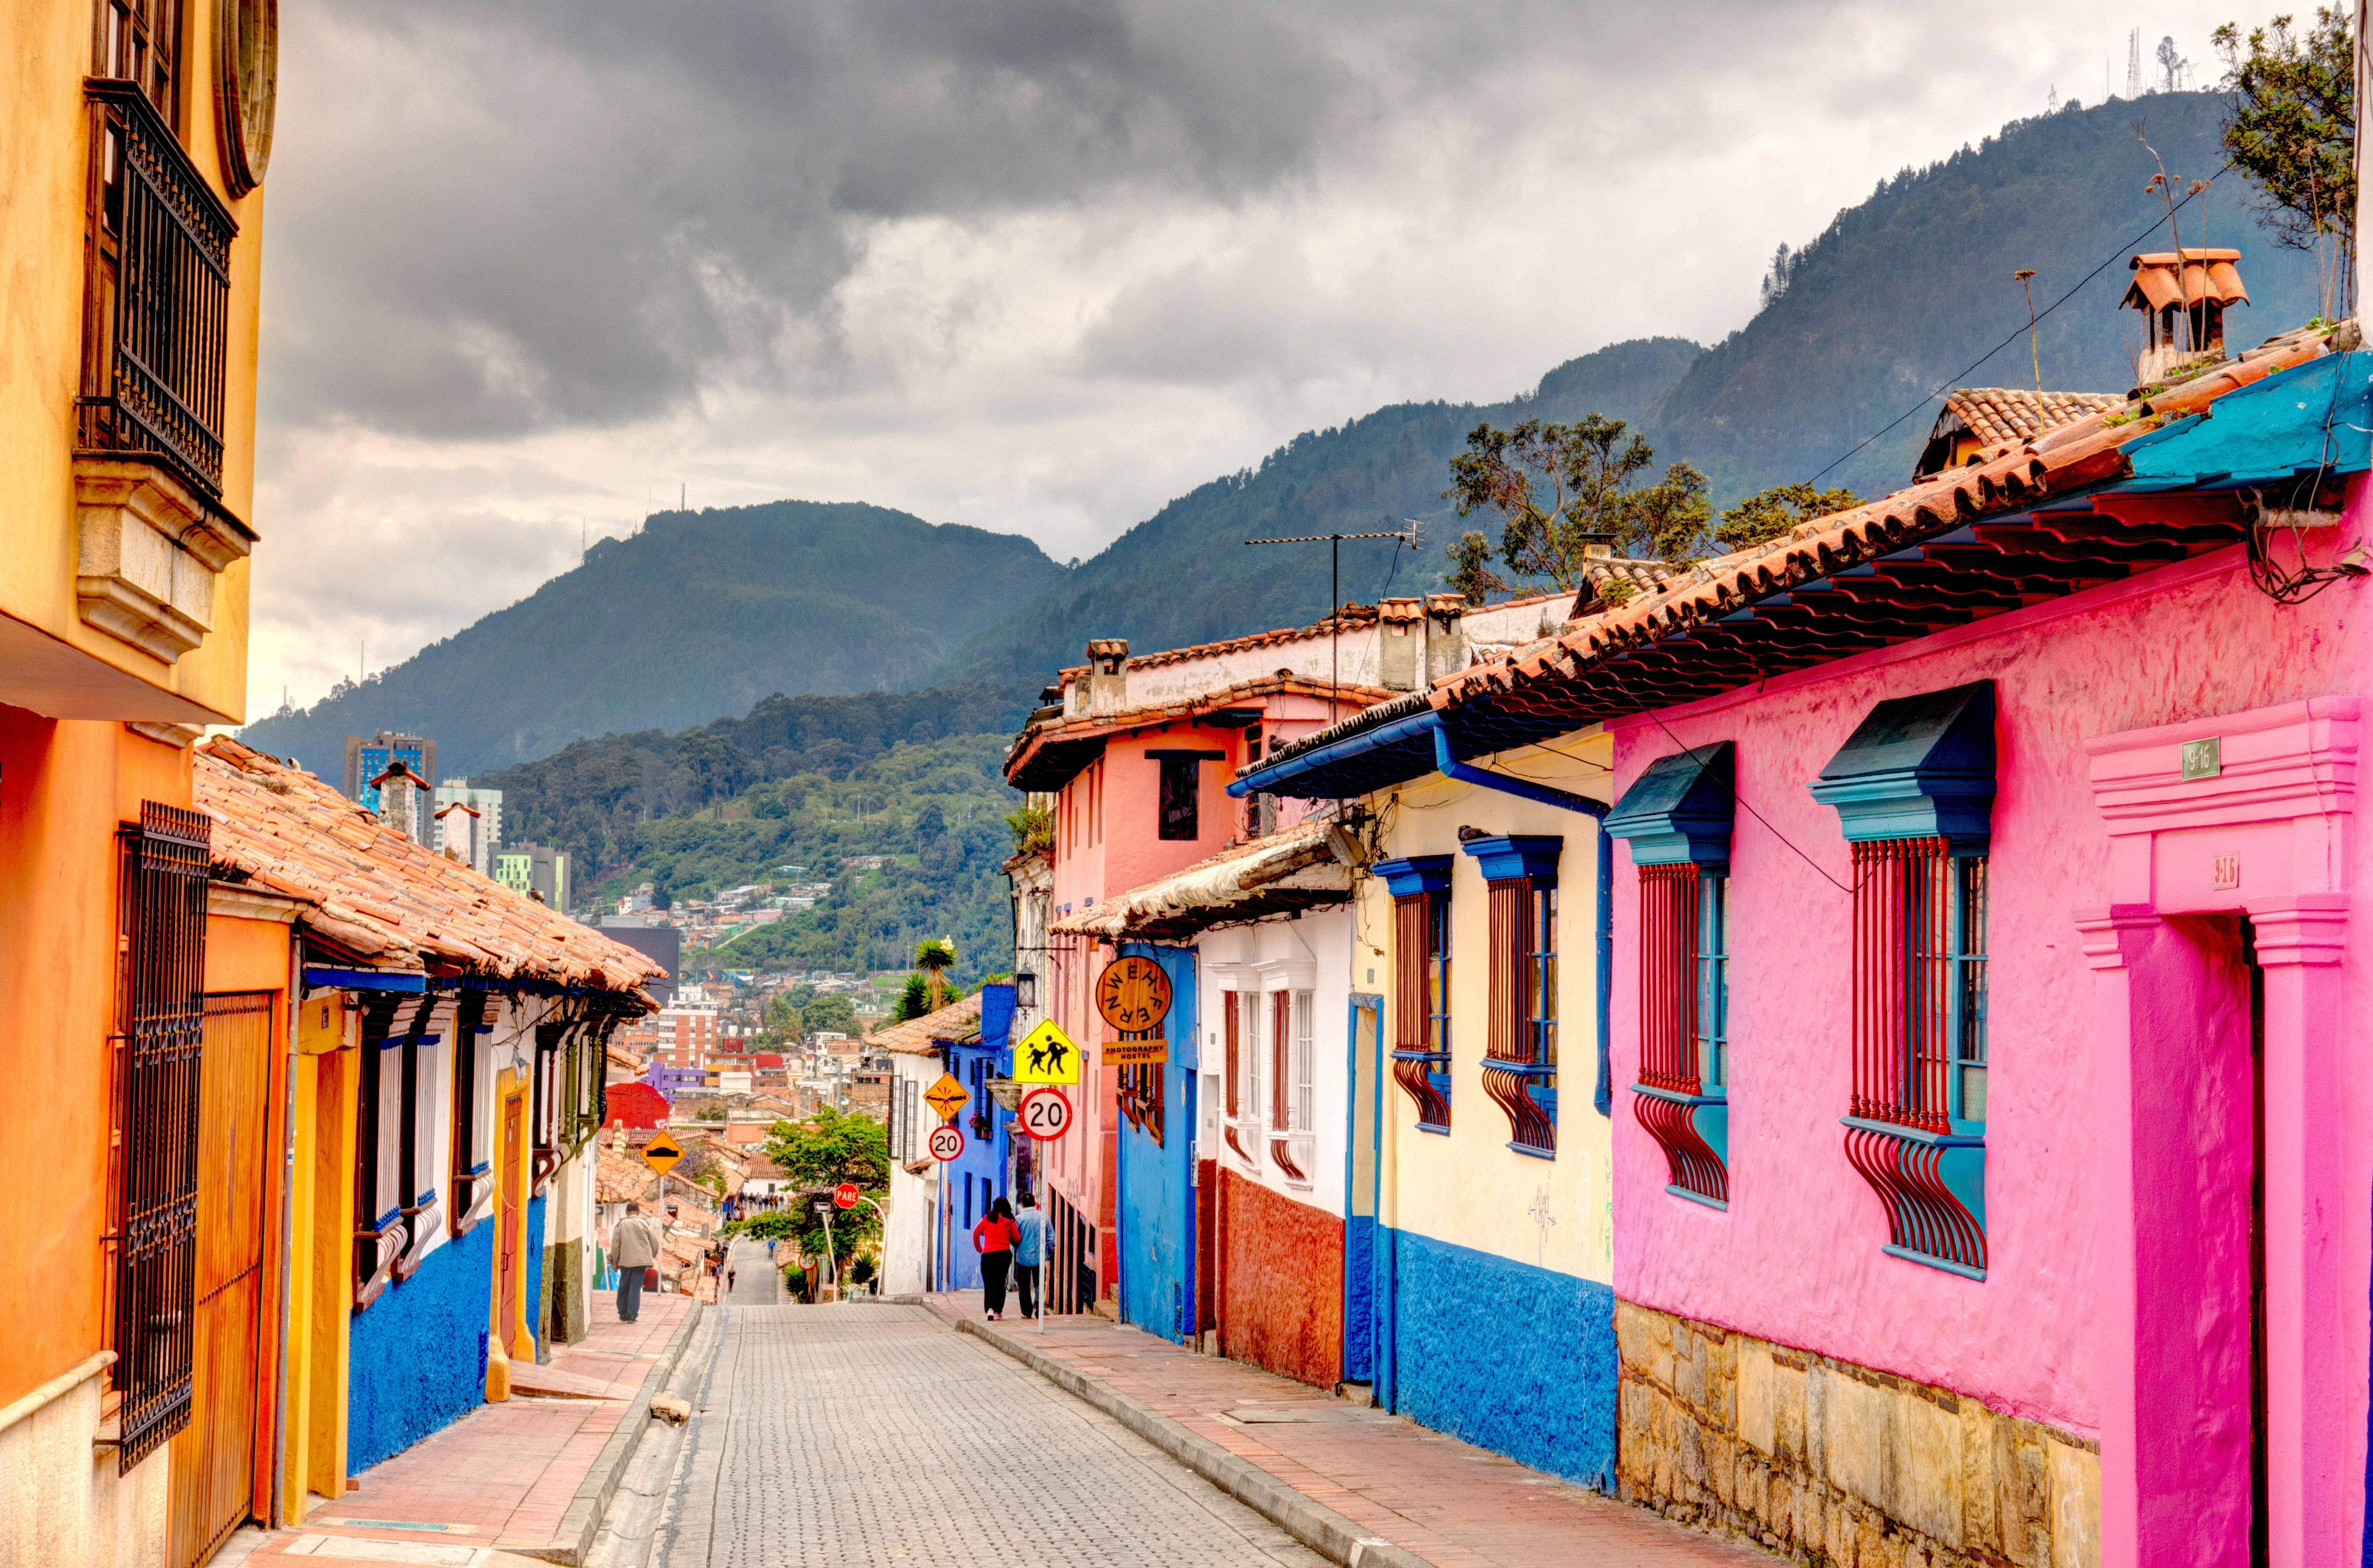 [Translate to Englisch:] A street with colorful houses in Colombia